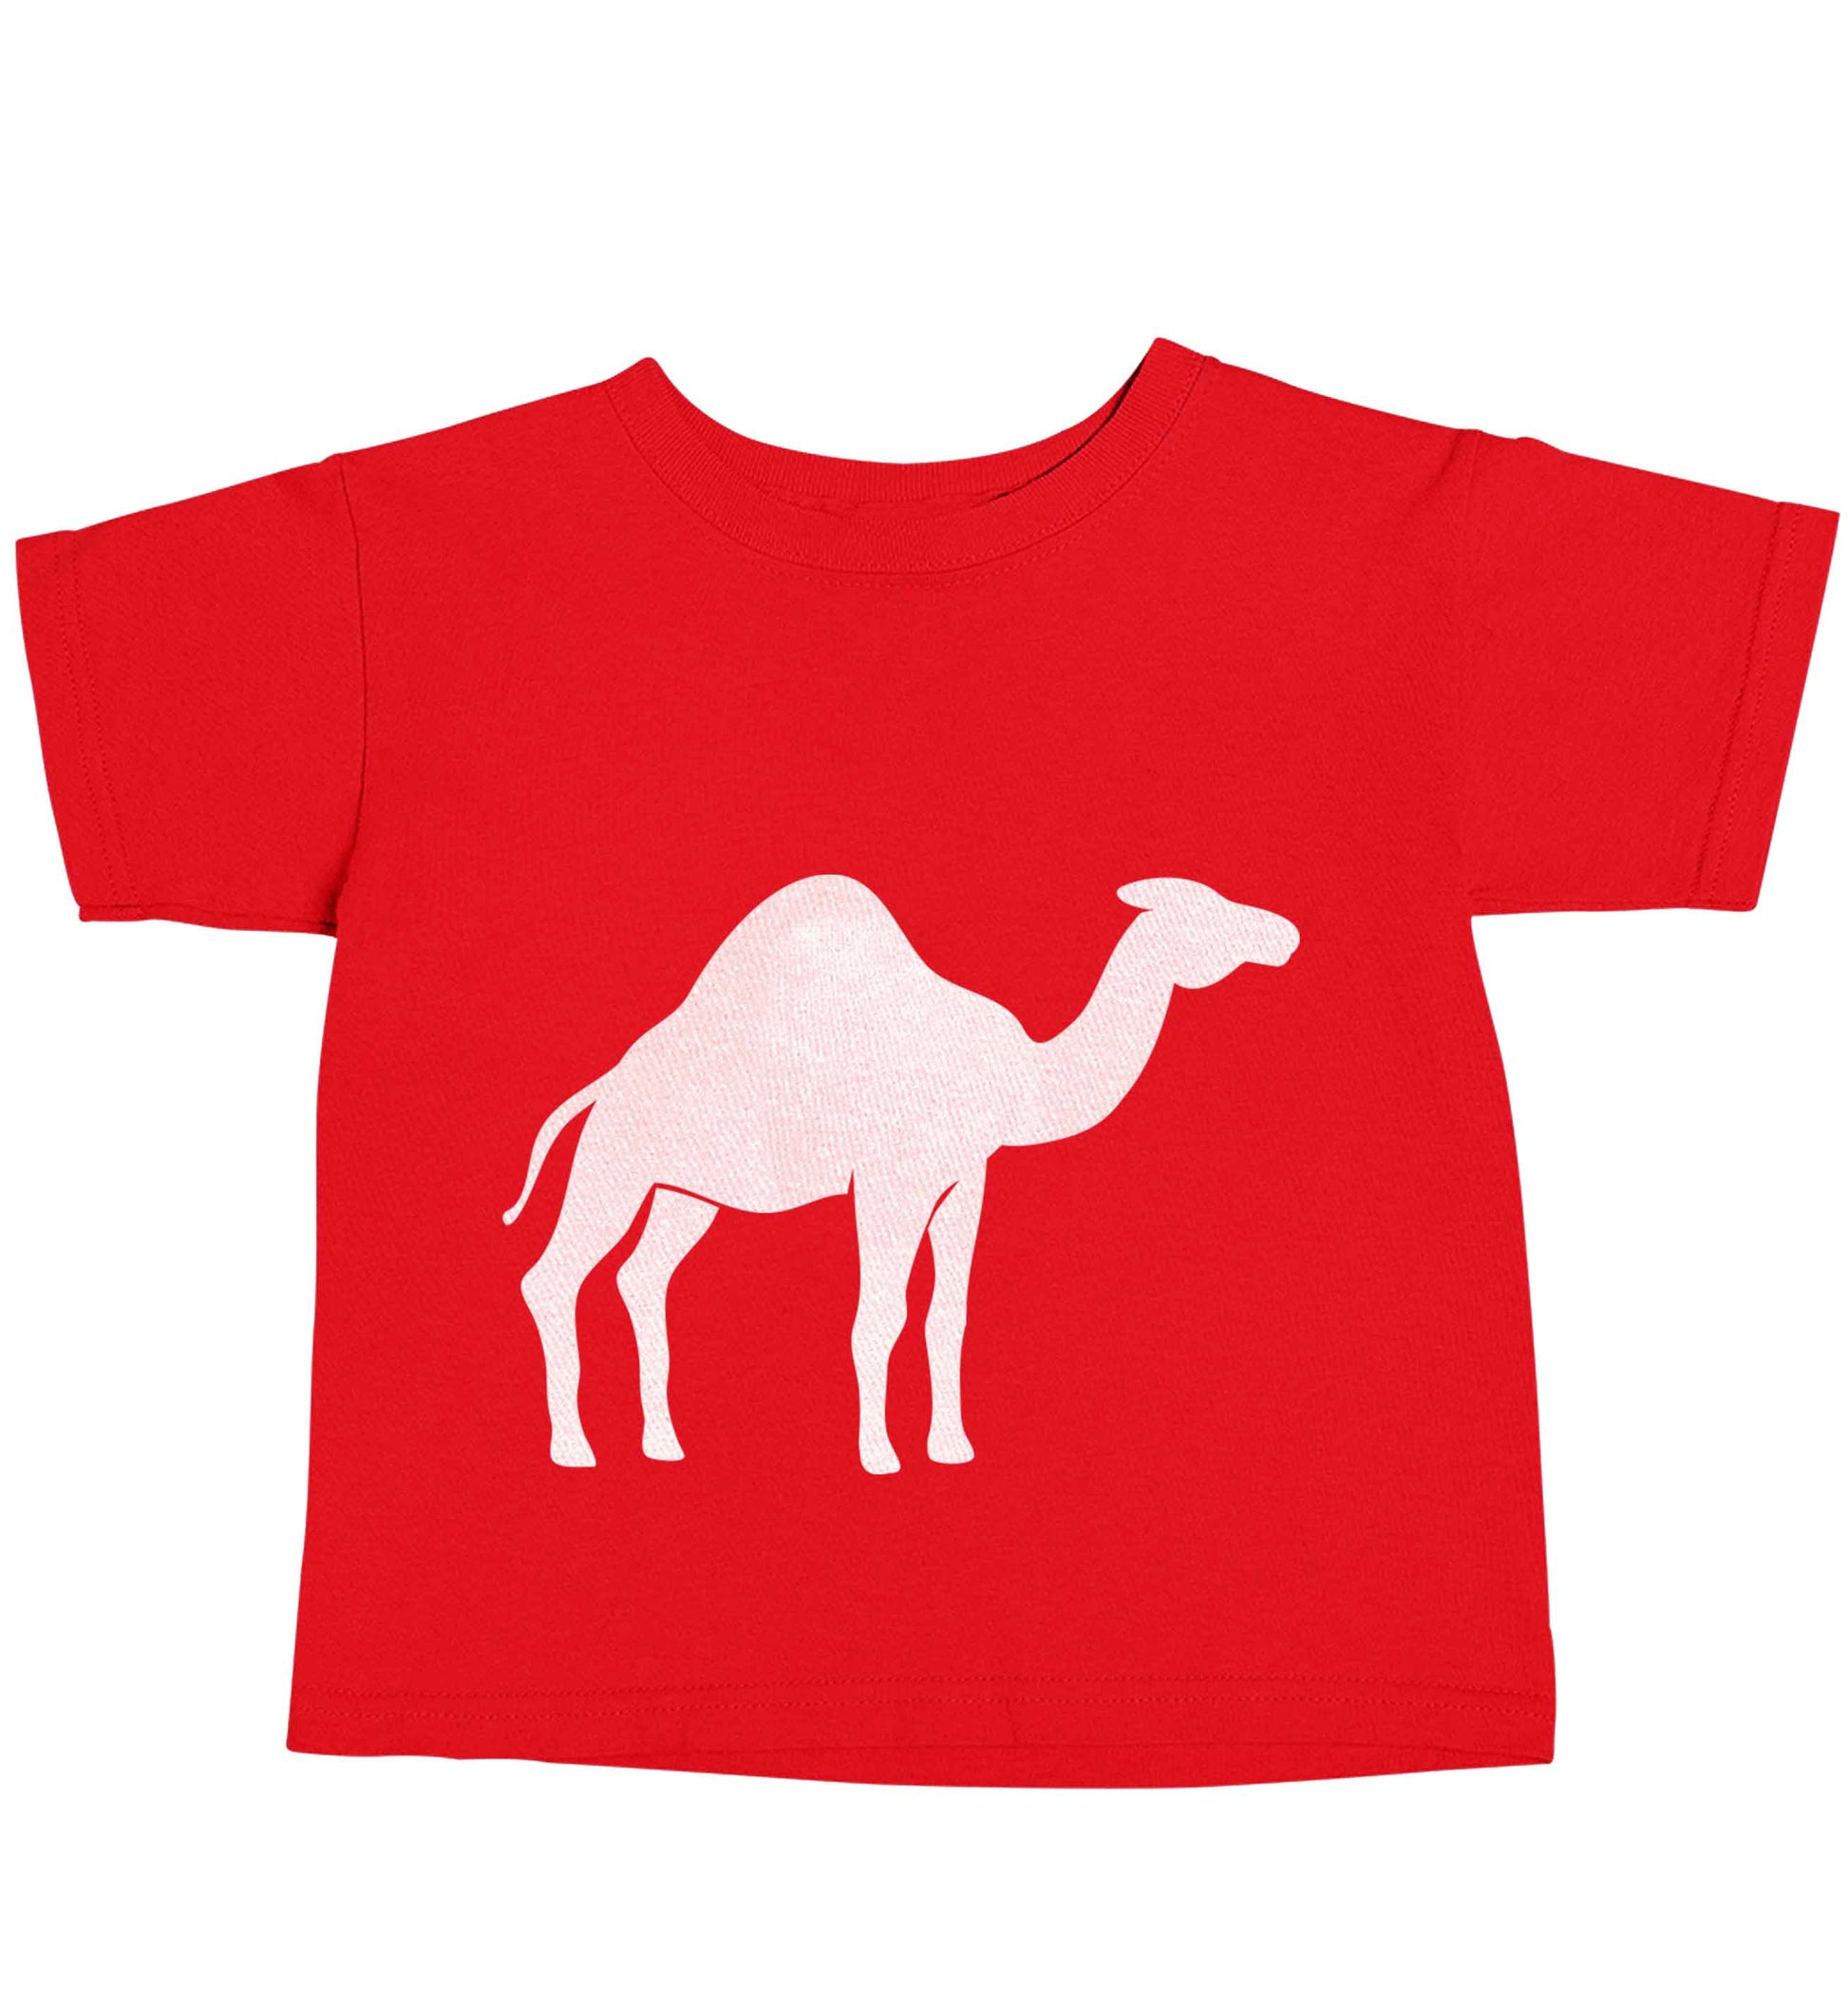 Blue camel red baby toddler Tshirt 2 Years